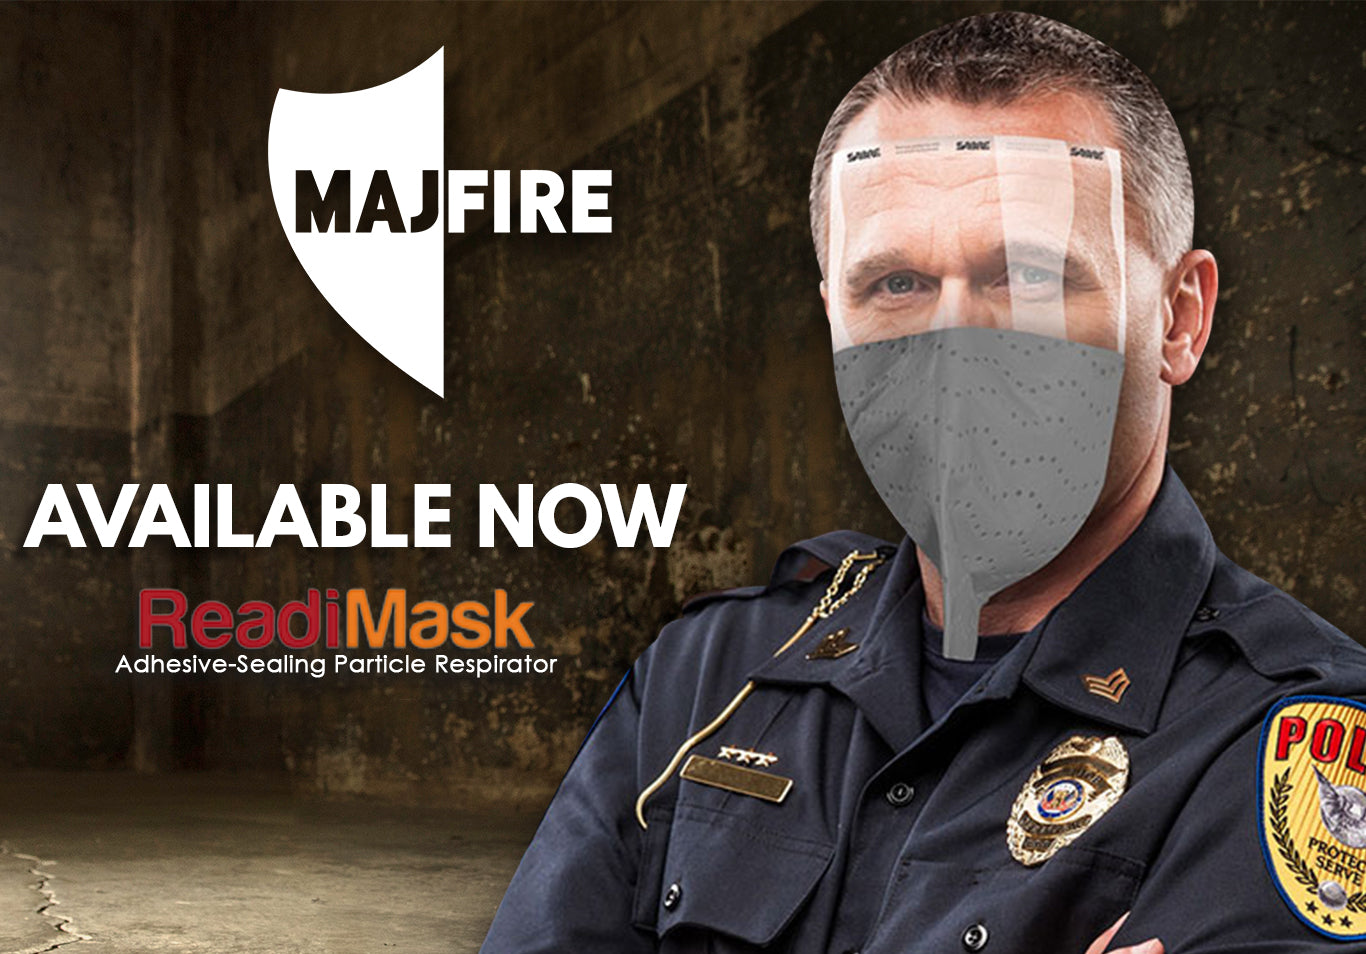 ReadiMask with Eyeshield Particle Respirator